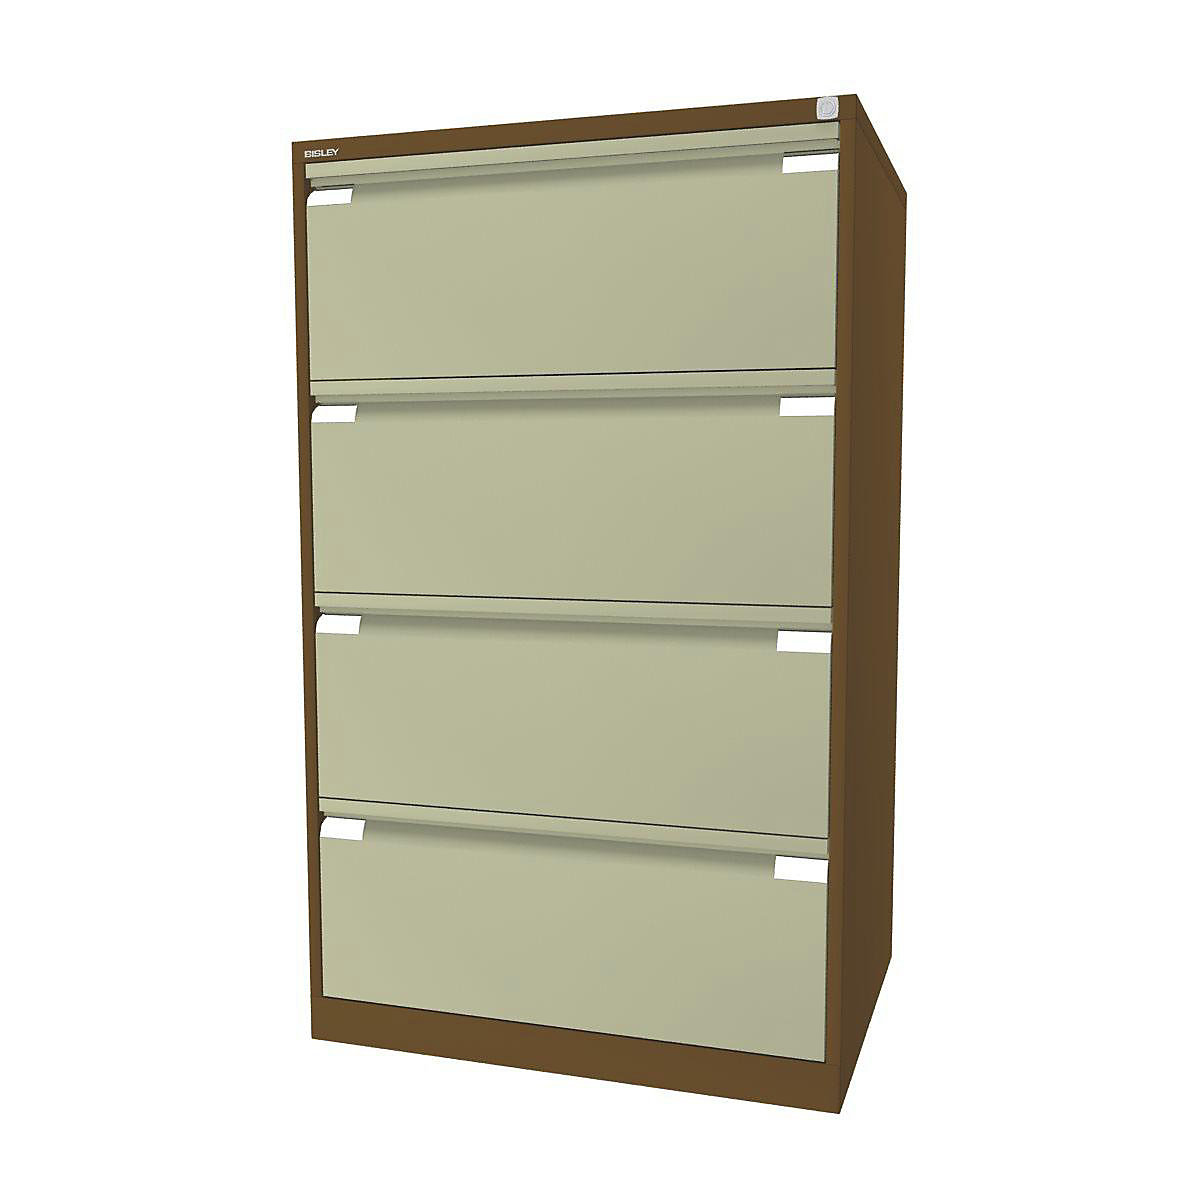 Suspension file cabinet, 2-track – BISLEY, 4 A4 drawers, sepia brown / creme-9